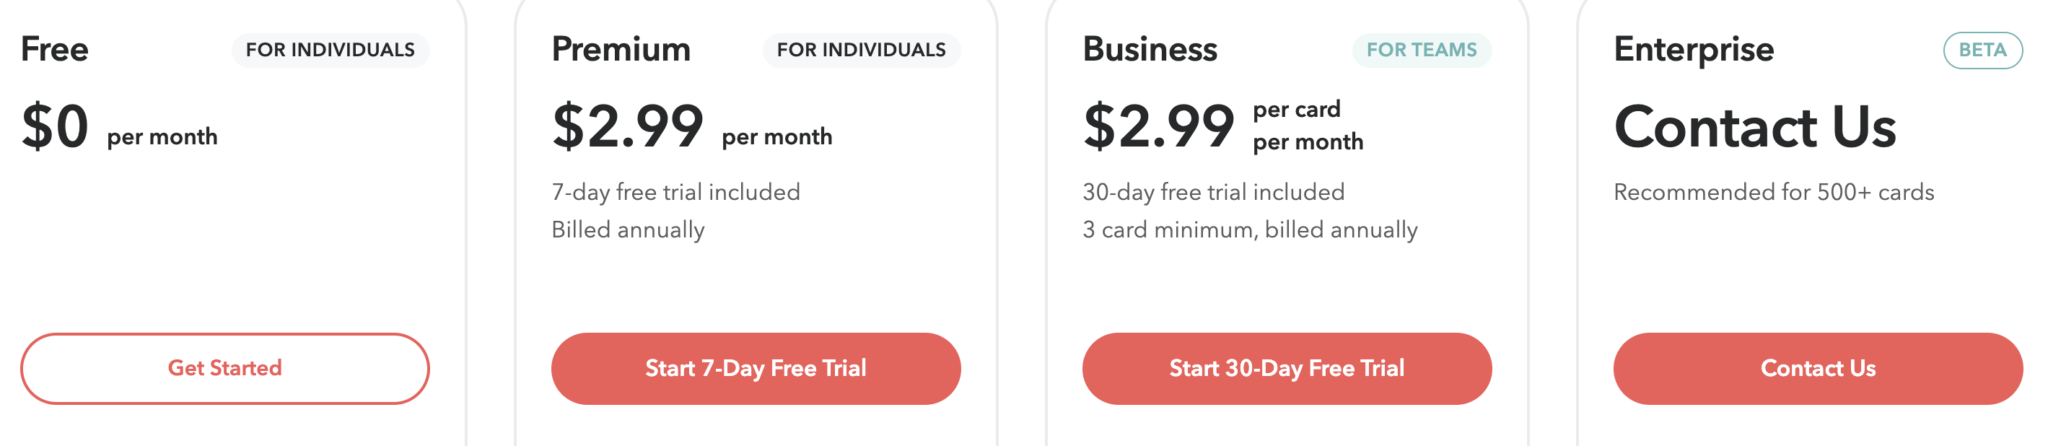 Blinq Digital Business Cards pricing